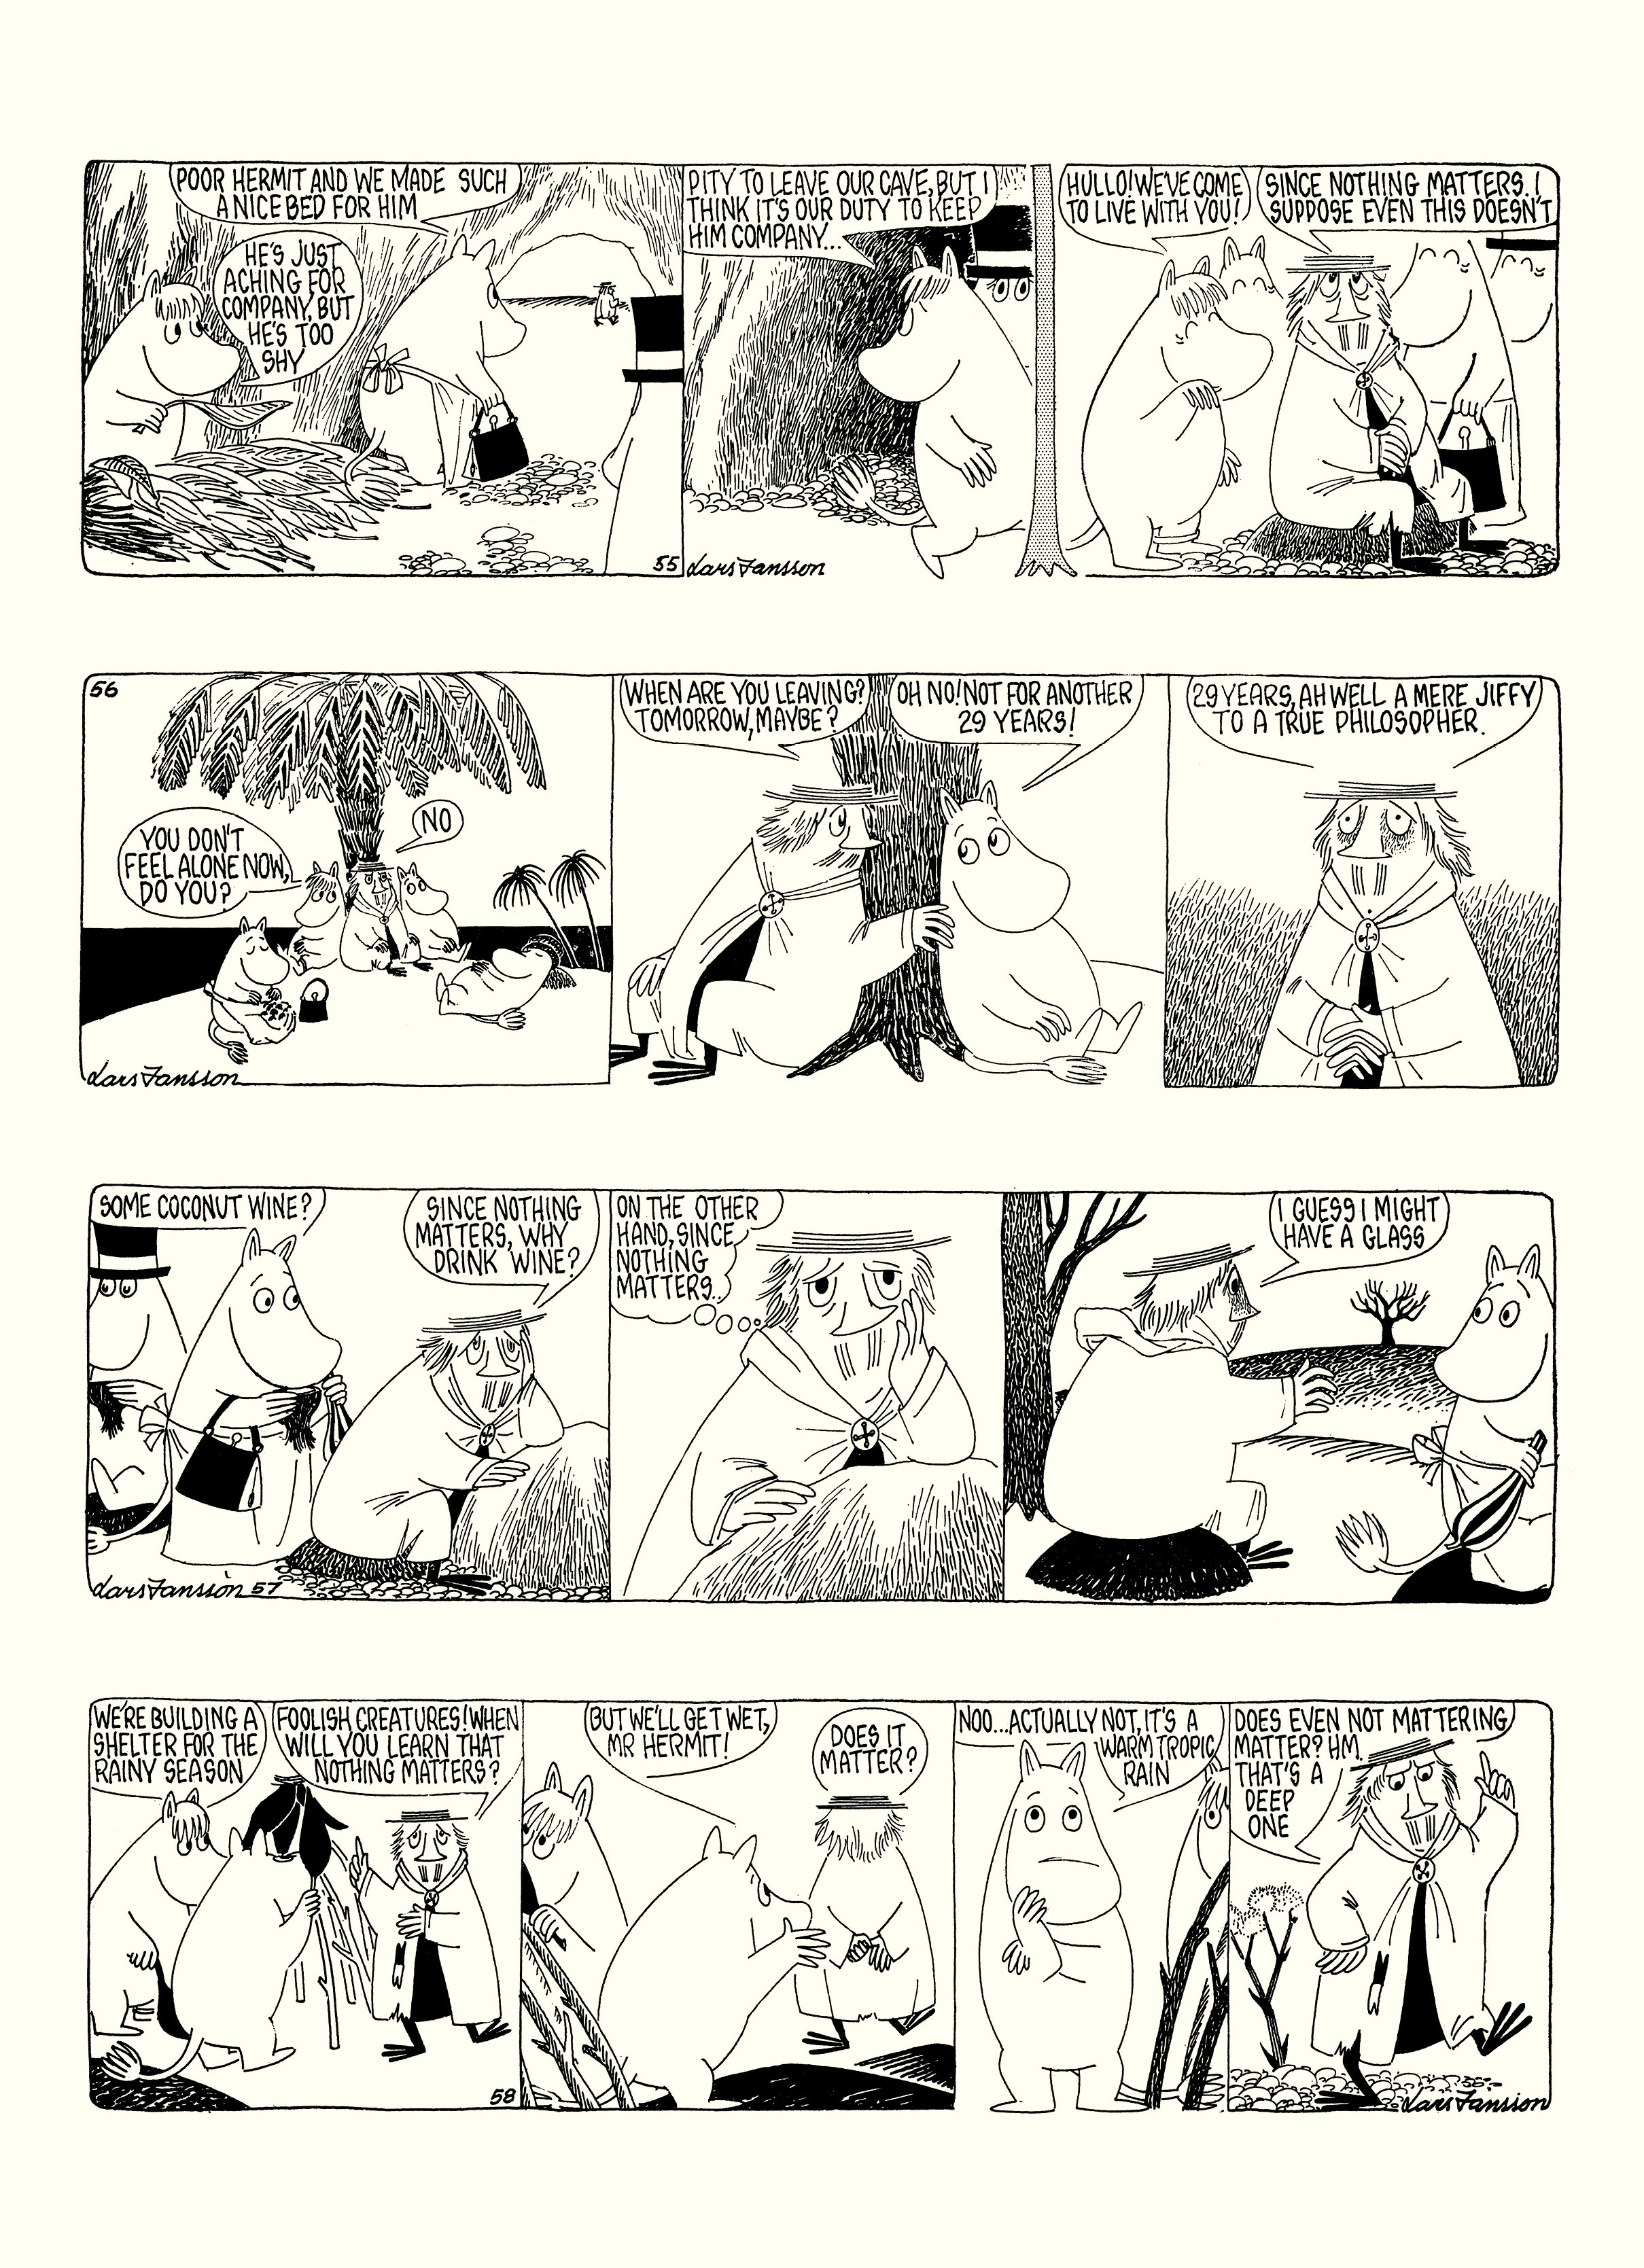 Read online Moomin: The Complete Lars Jansson Comic Strip comic -  Issue # TPB 8 - 19